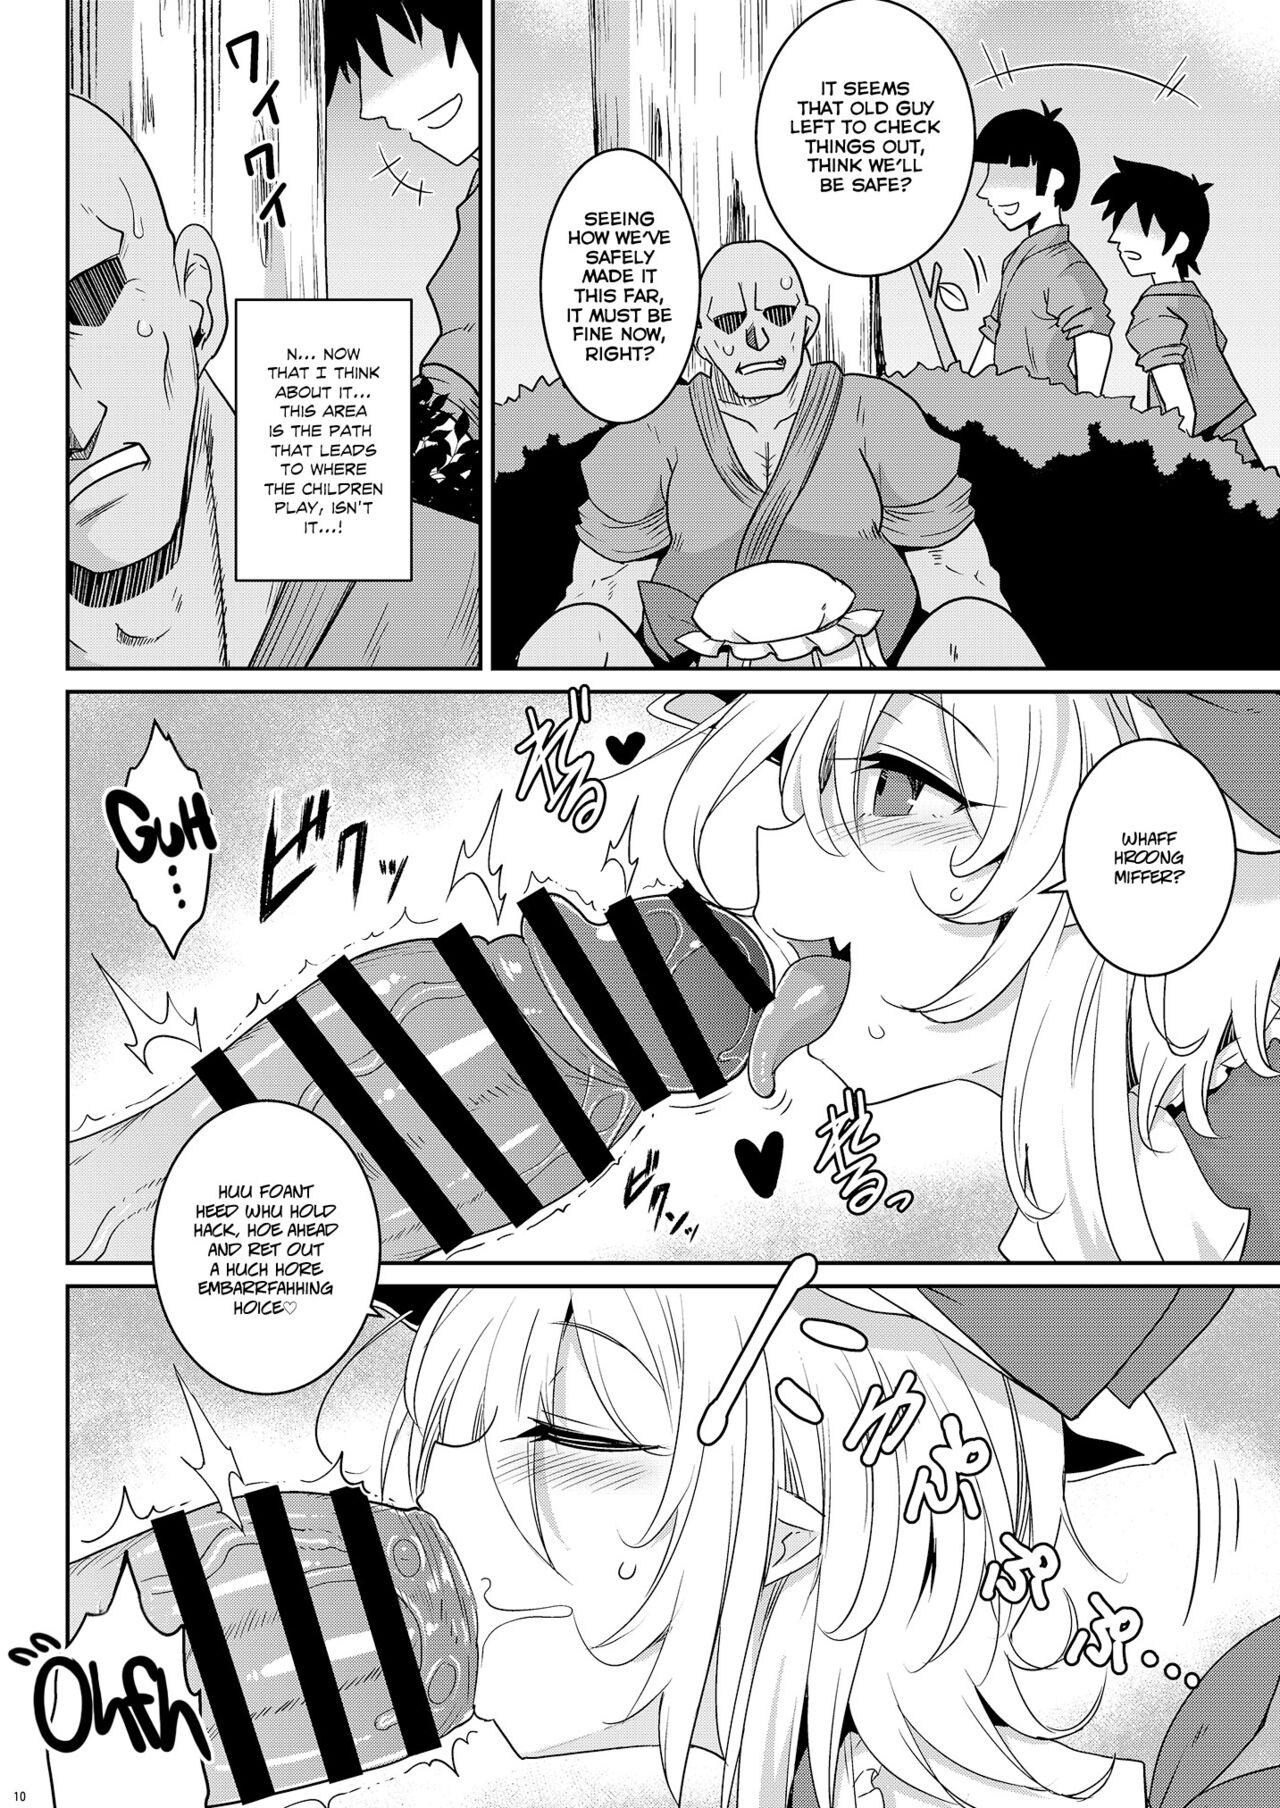 Outdoors MSGKWR2 - Touhou project Raw - Page 9